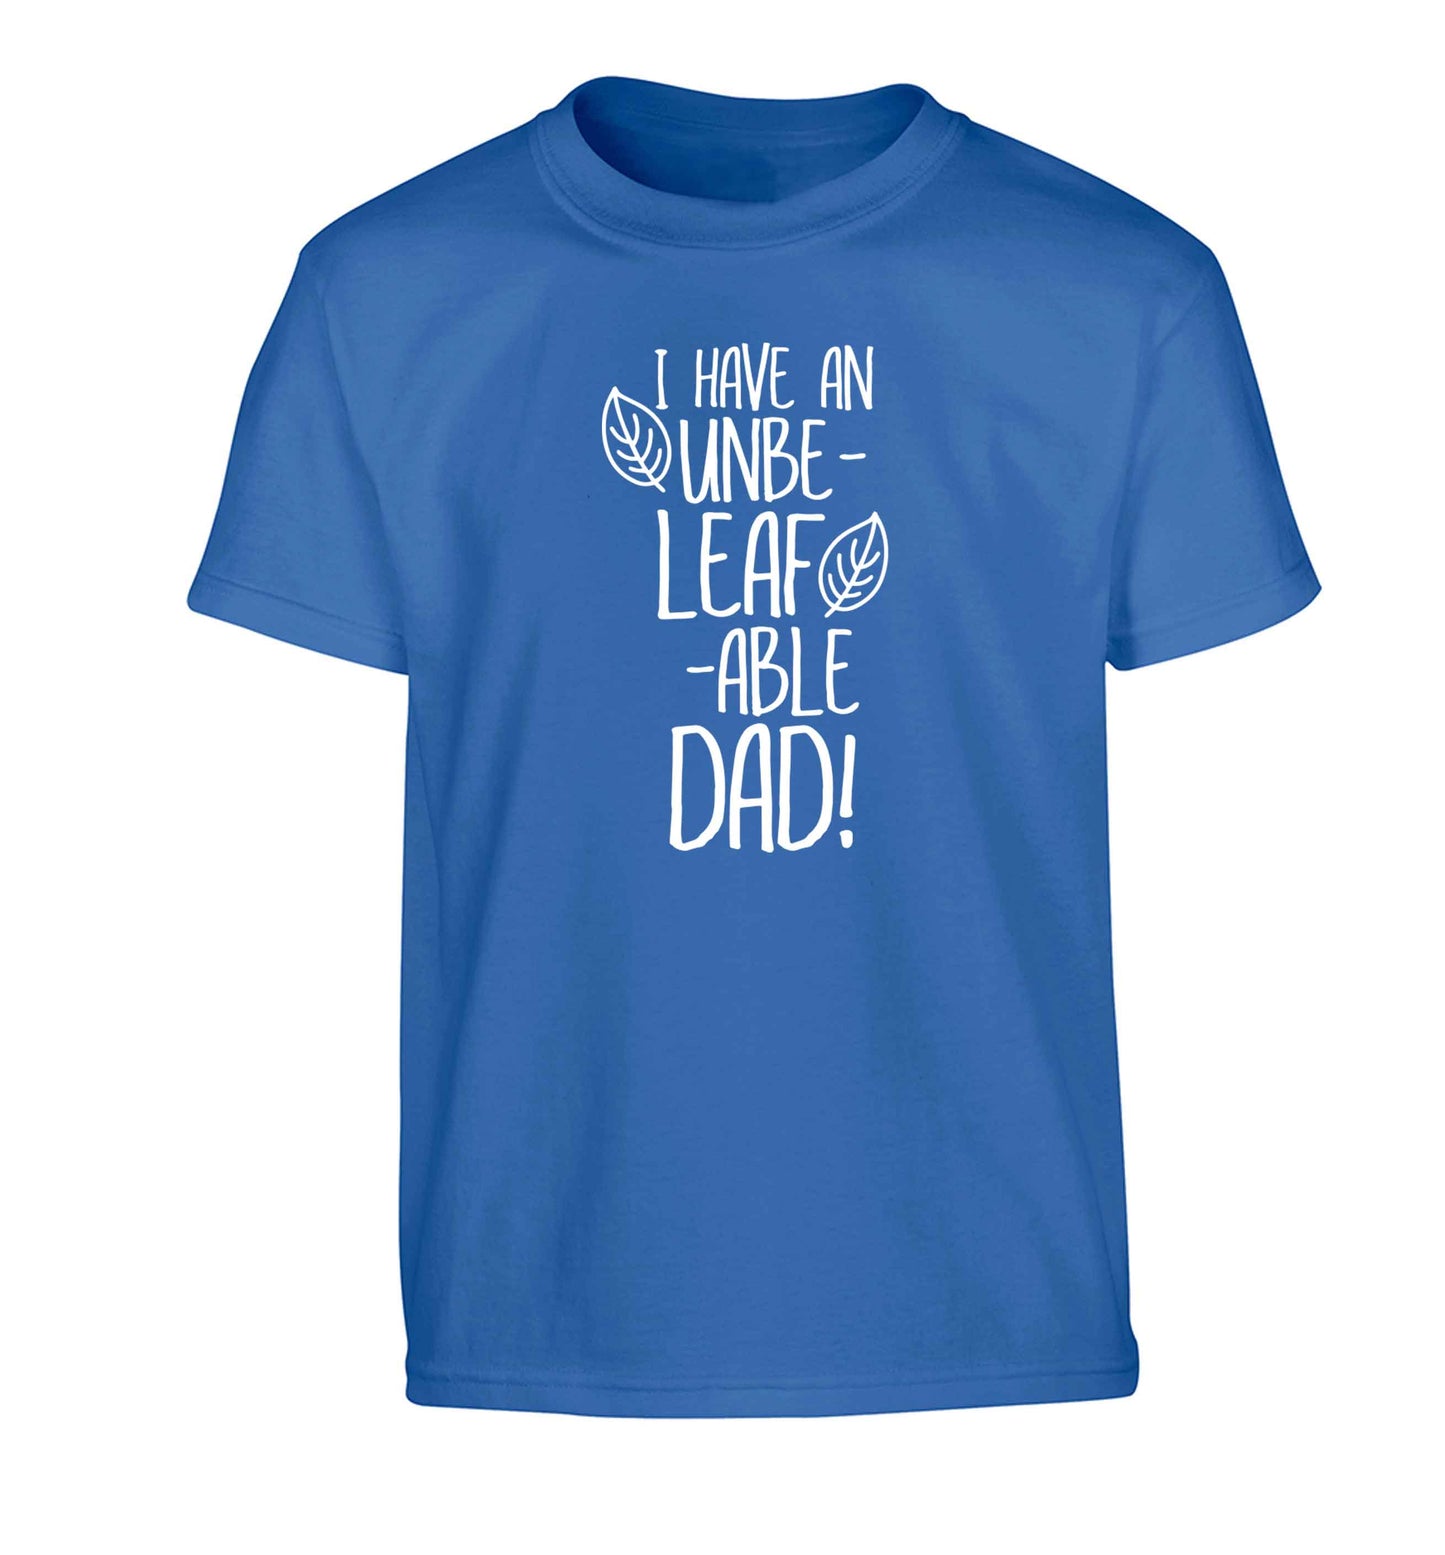 I have an unbe-leaf-able dad Children's blue Tshirt 12-13 Years